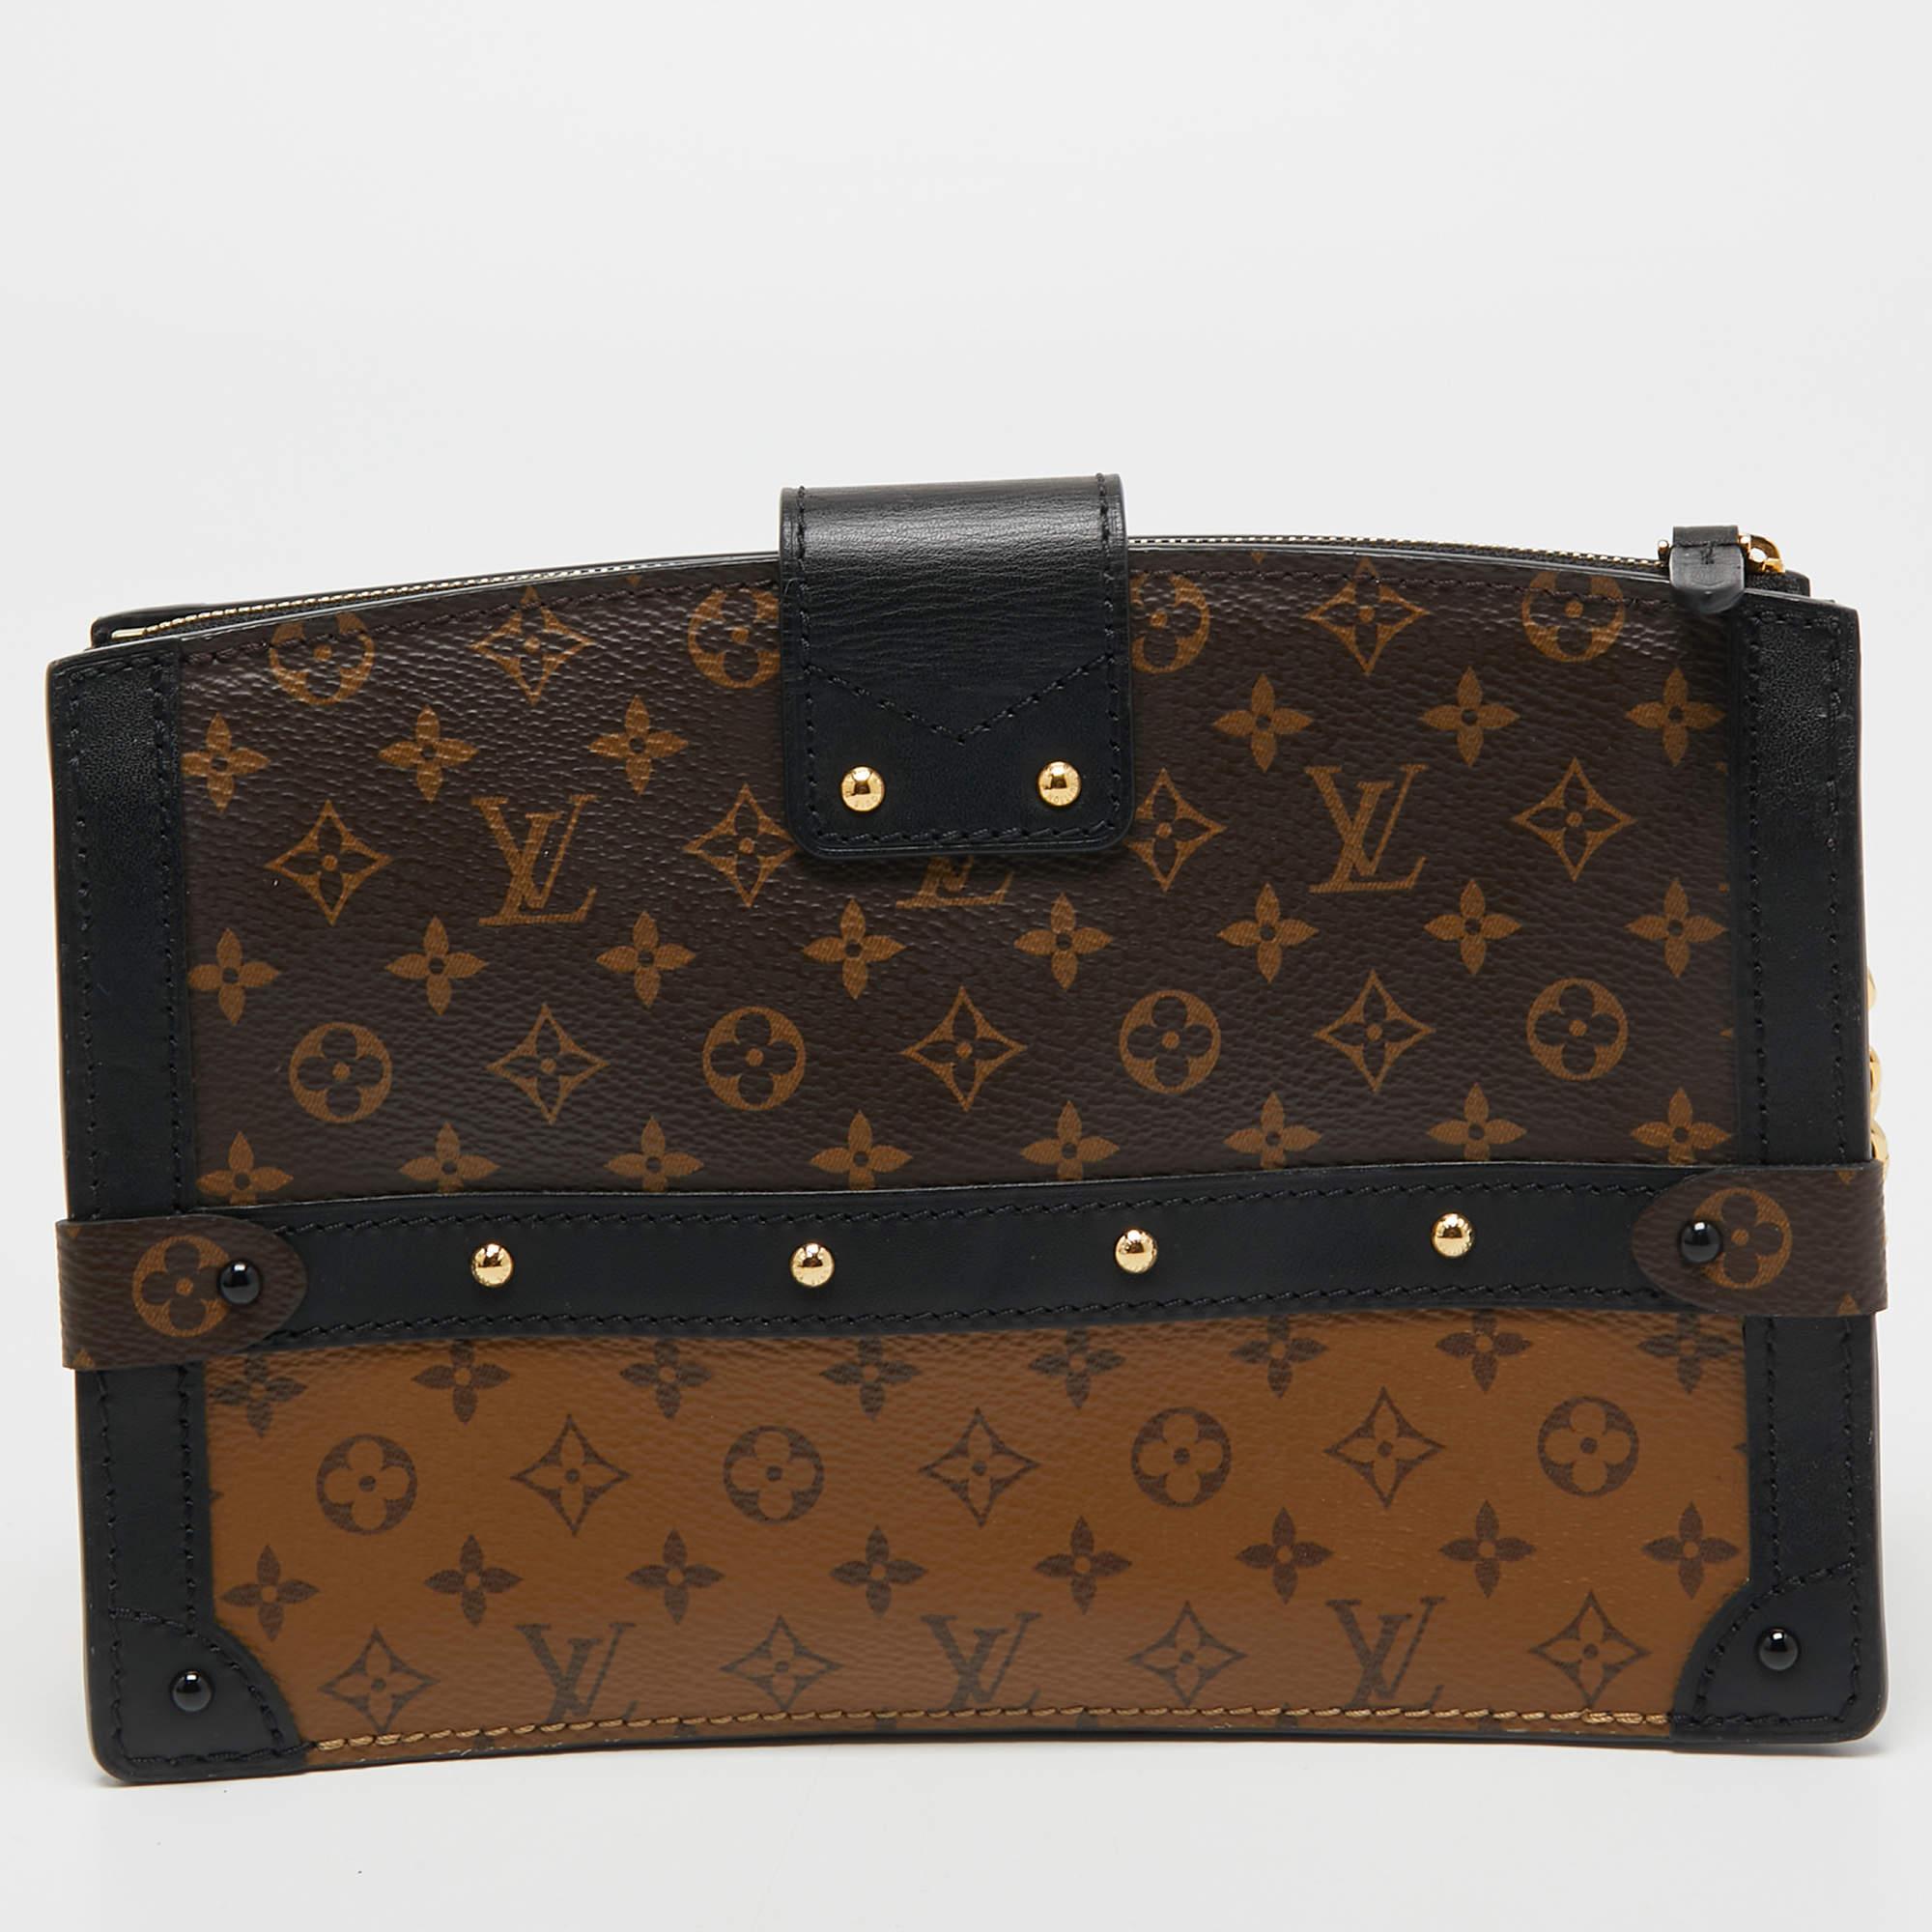 Delivered as part of Louis Vuitton's Fall 2018 collection by Nicholas Ghesquiere, the Trunk Clutch is like a stunning reiteration of the Petite Malle and is inspired by the iconic Louis Vuitton trunks. Crafted from Monogram reverse canvas, the